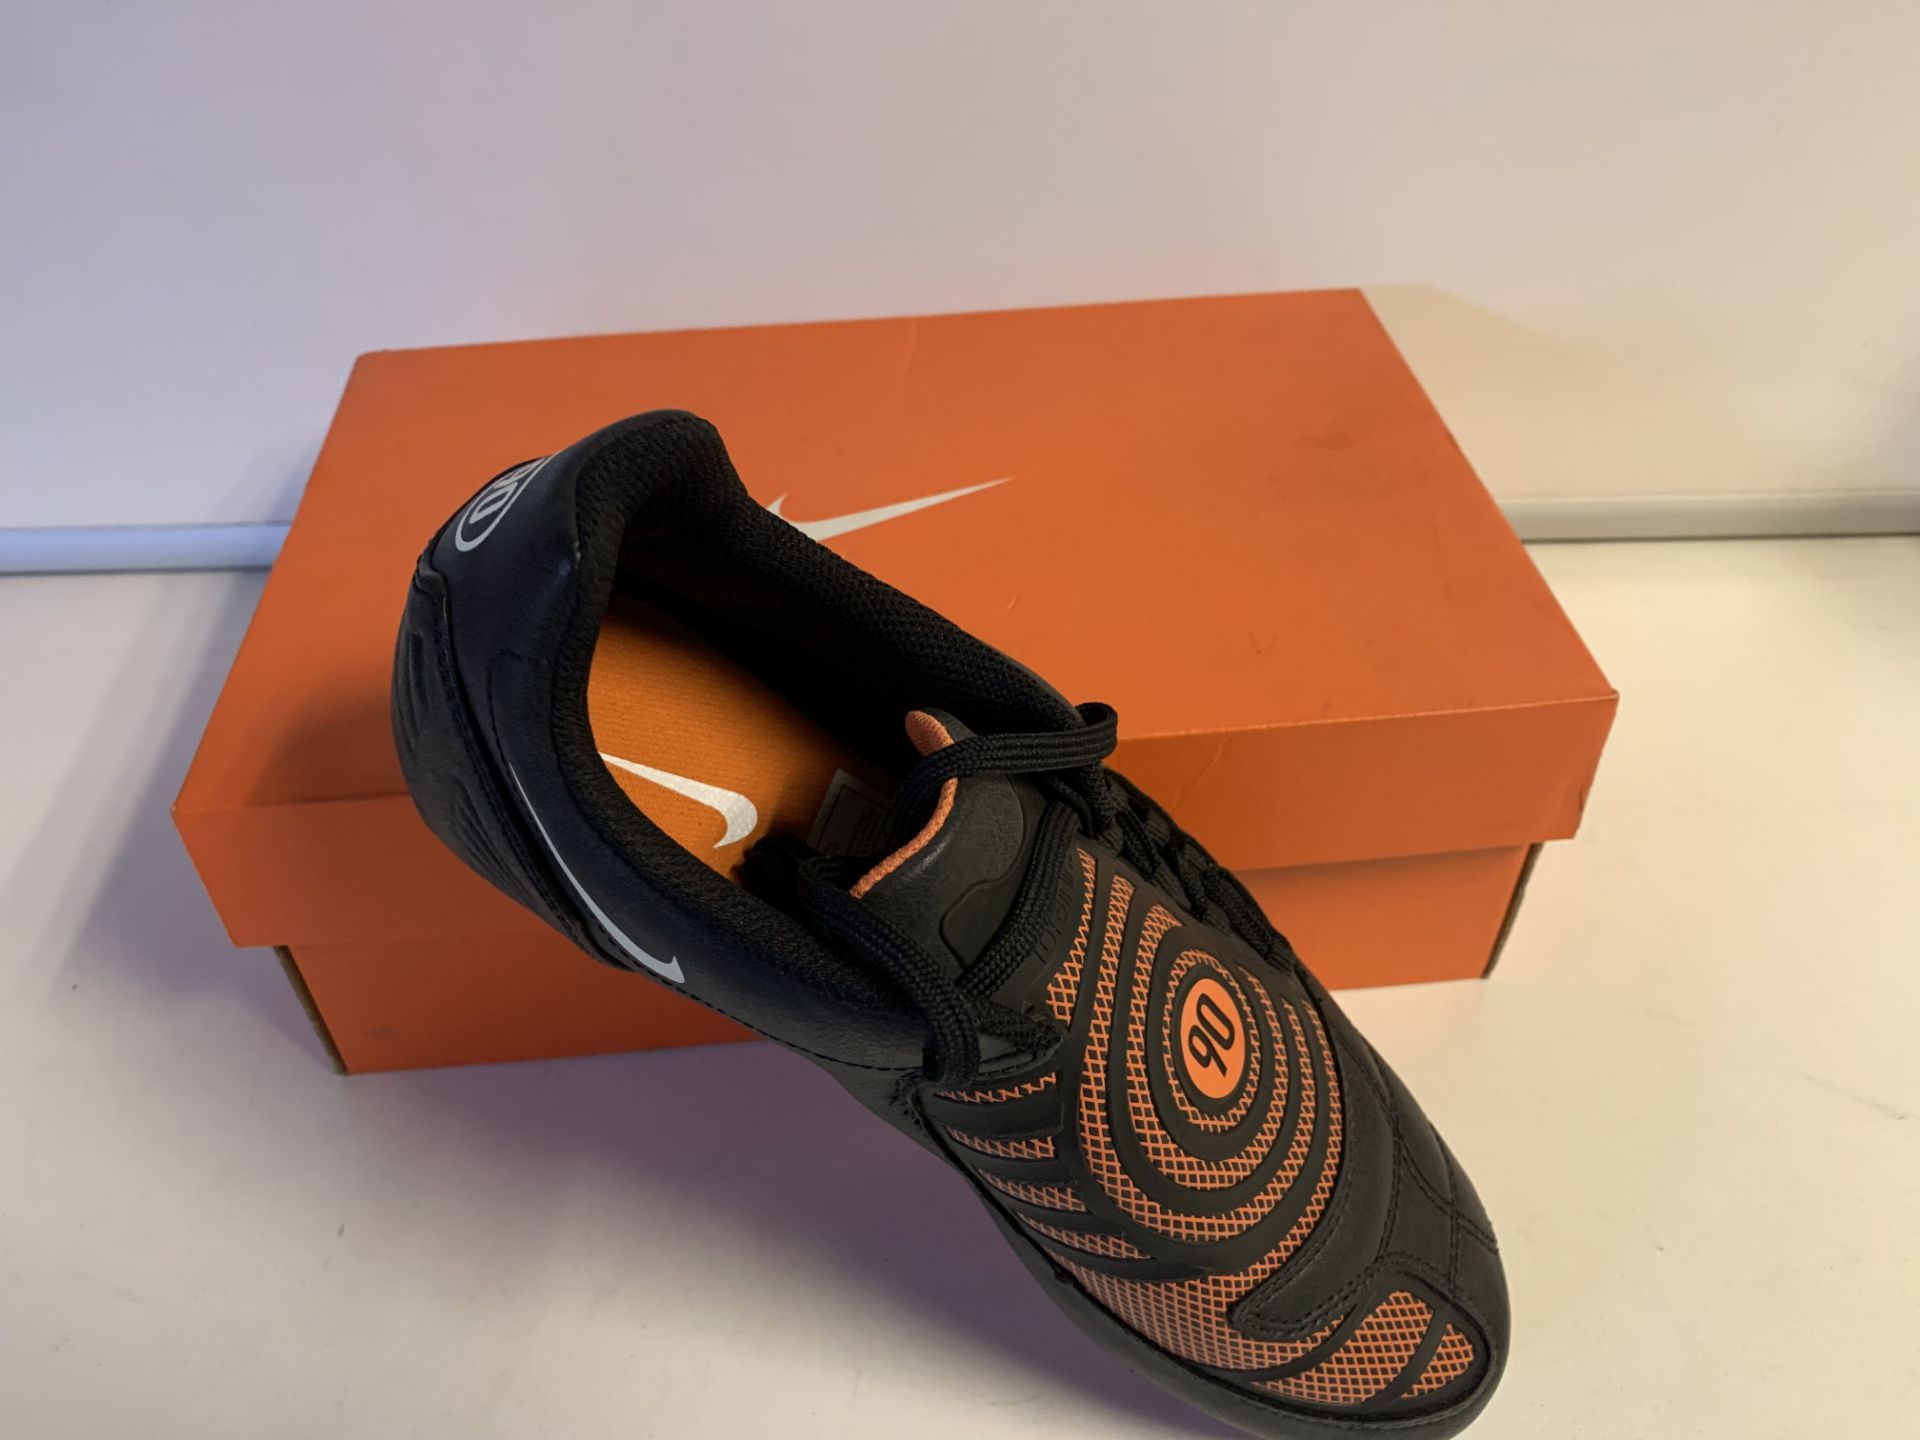 (NO VAT) 3 X BRAND NEW RETAIL BOXED NIKE JR TOTAL 90 SHOOT 2 EXTRA SG FOOTBALL BOOTS SIZE 5.5 (299/